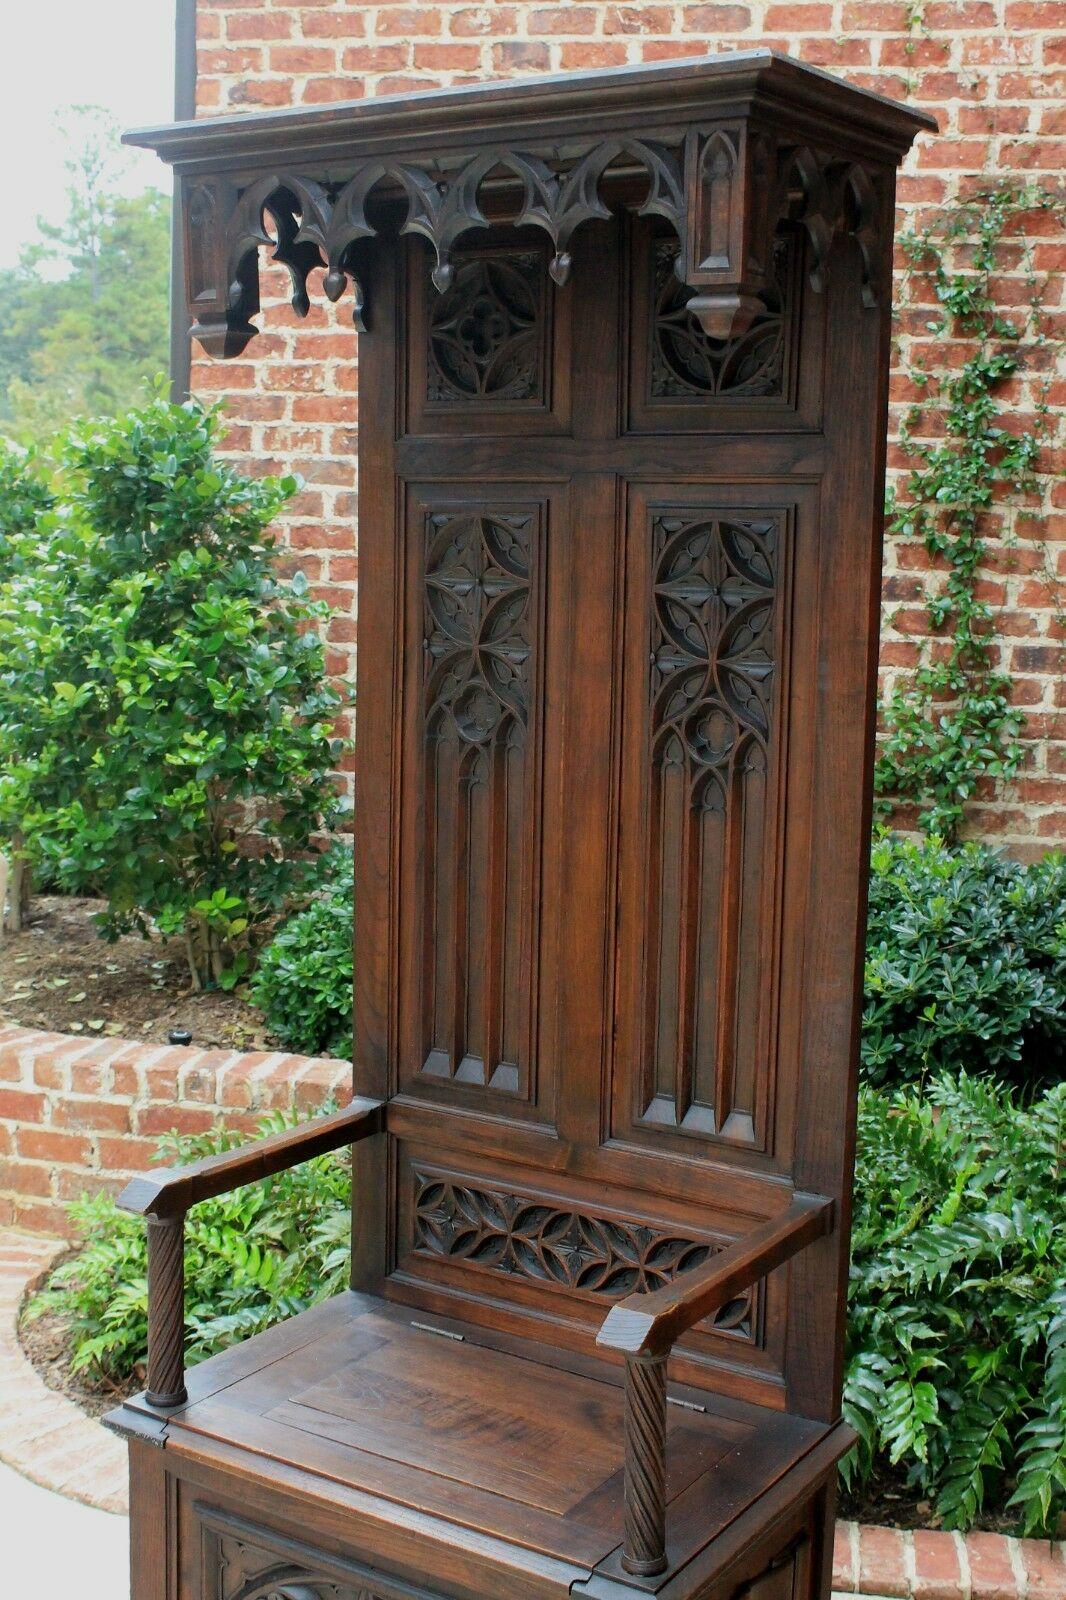 Gothic Revival Antique French Carved Oak Hall Seat Monk's Bench Throne Chair Canopy Tall 19th C